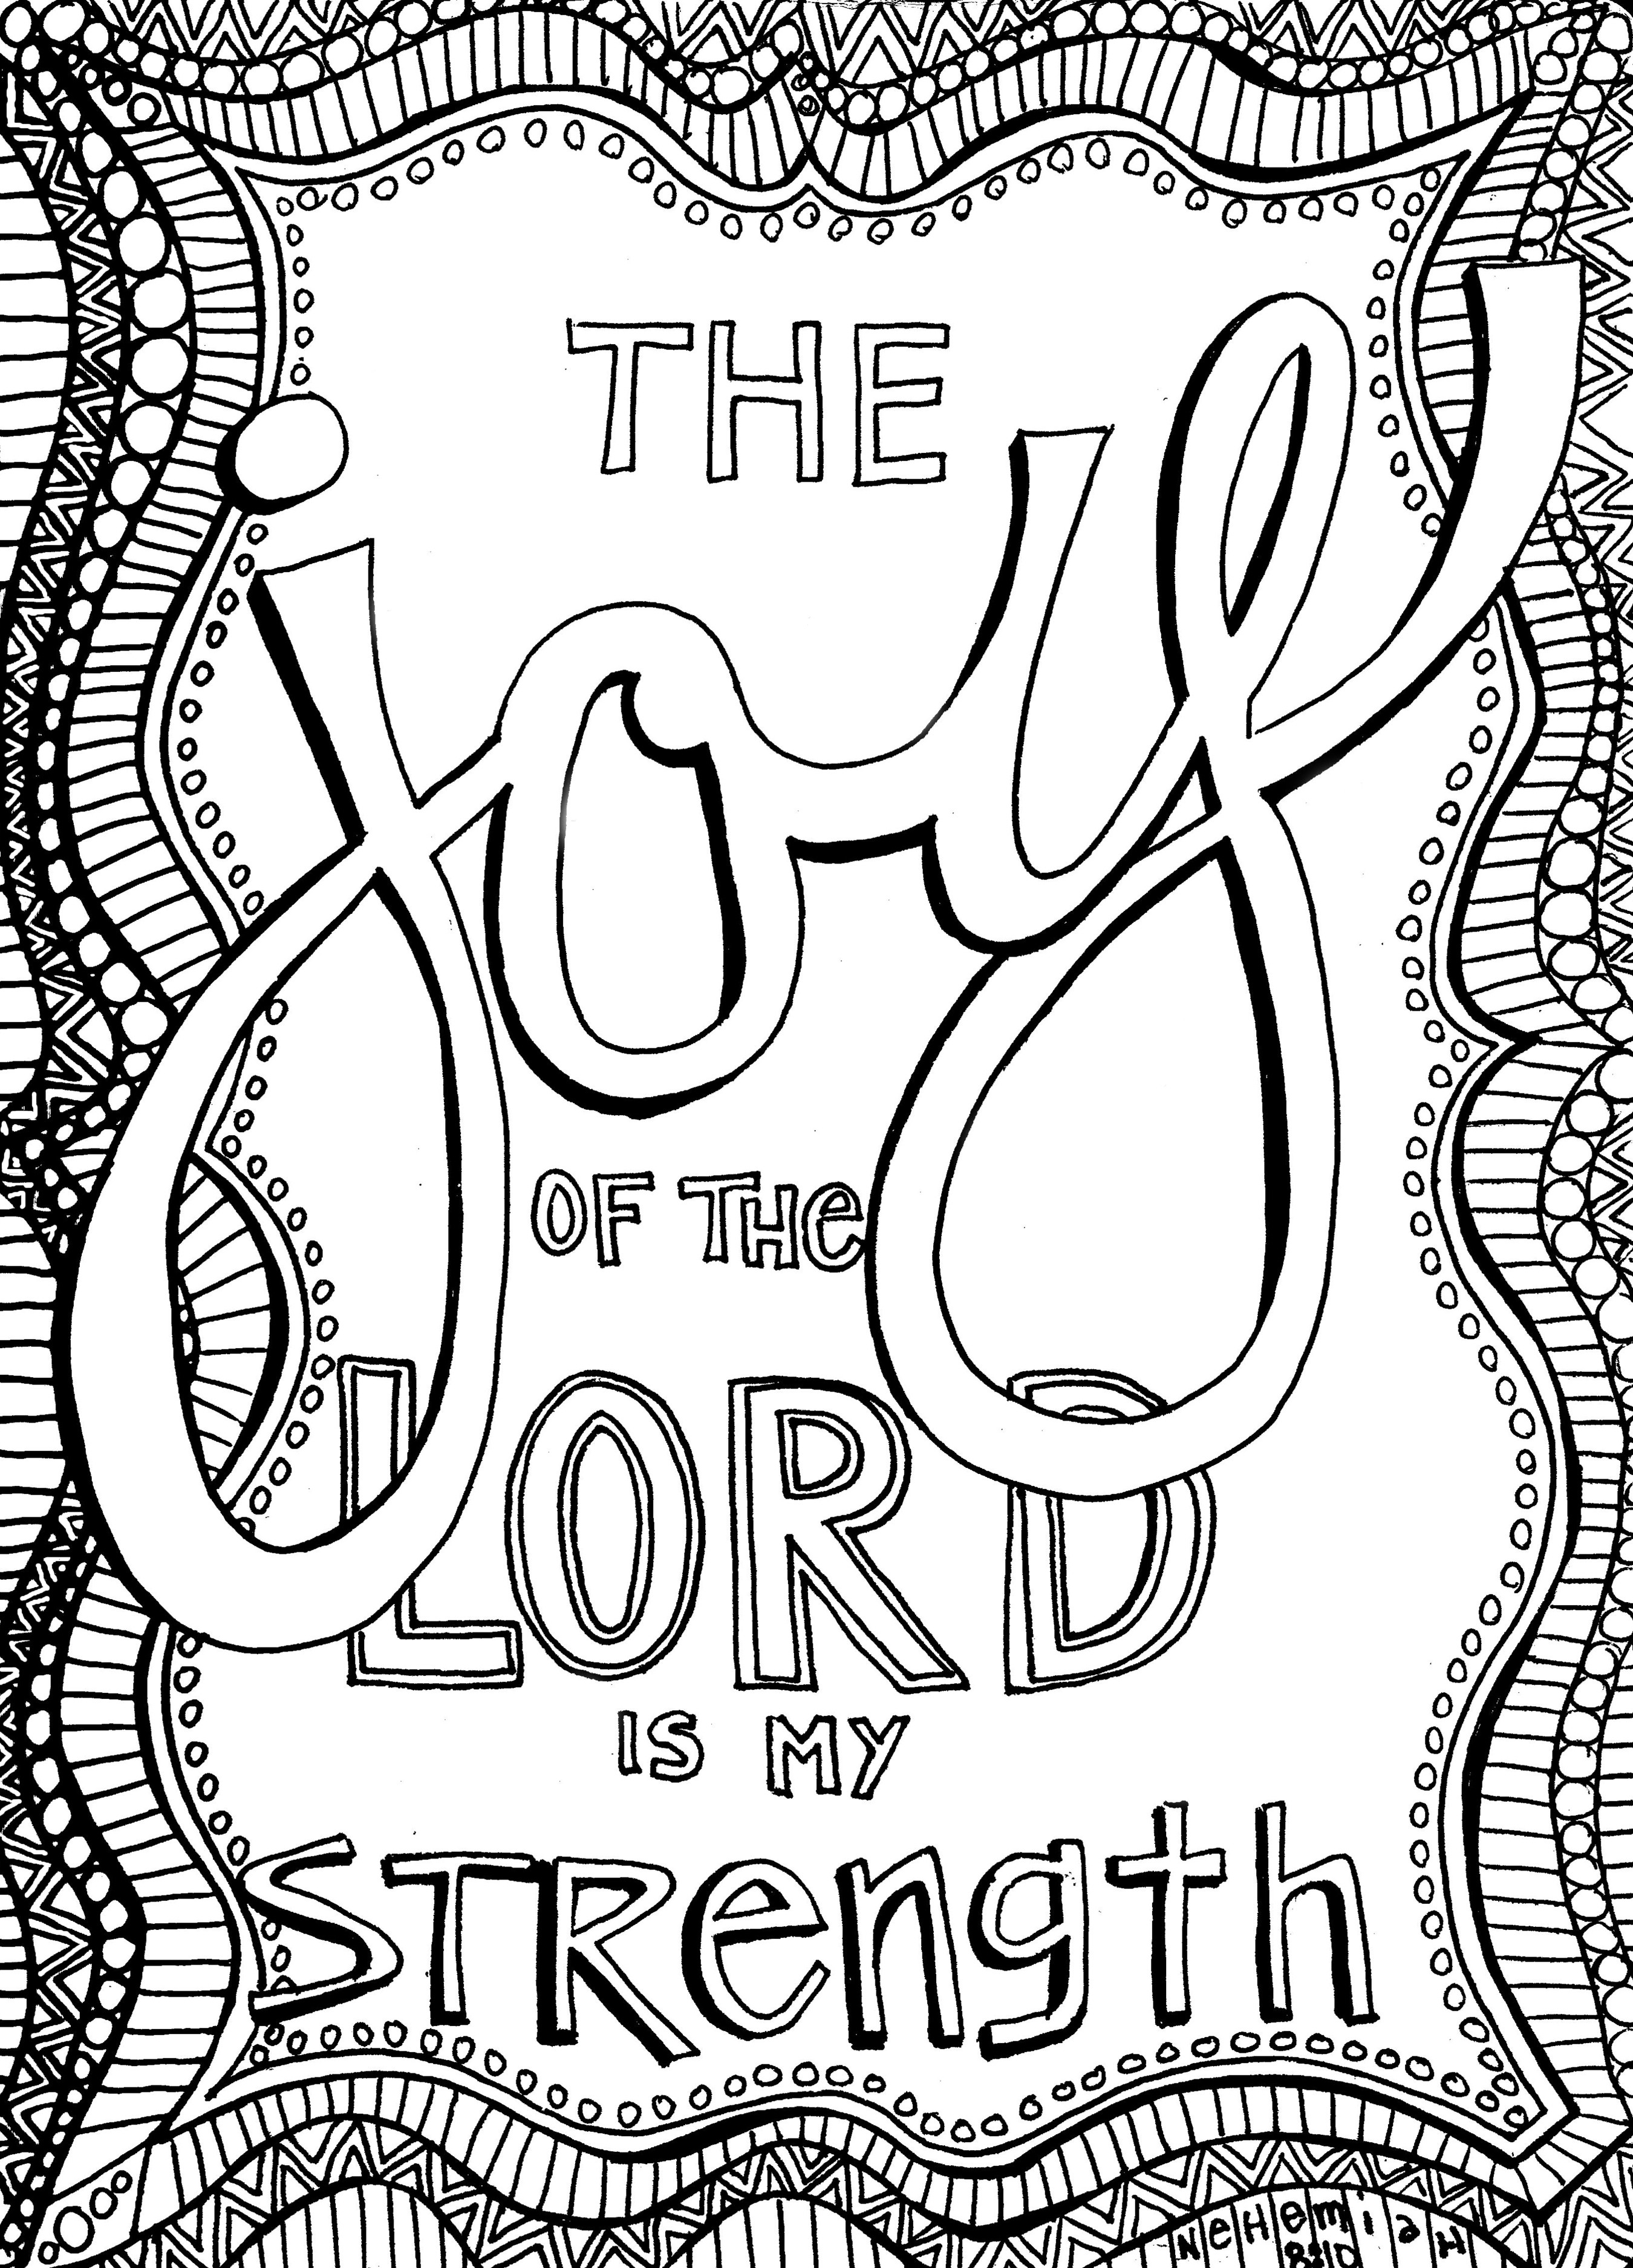 Free Christian Adult Coloring Pages
 Free Christian Coloring Pages for Adults Roundup